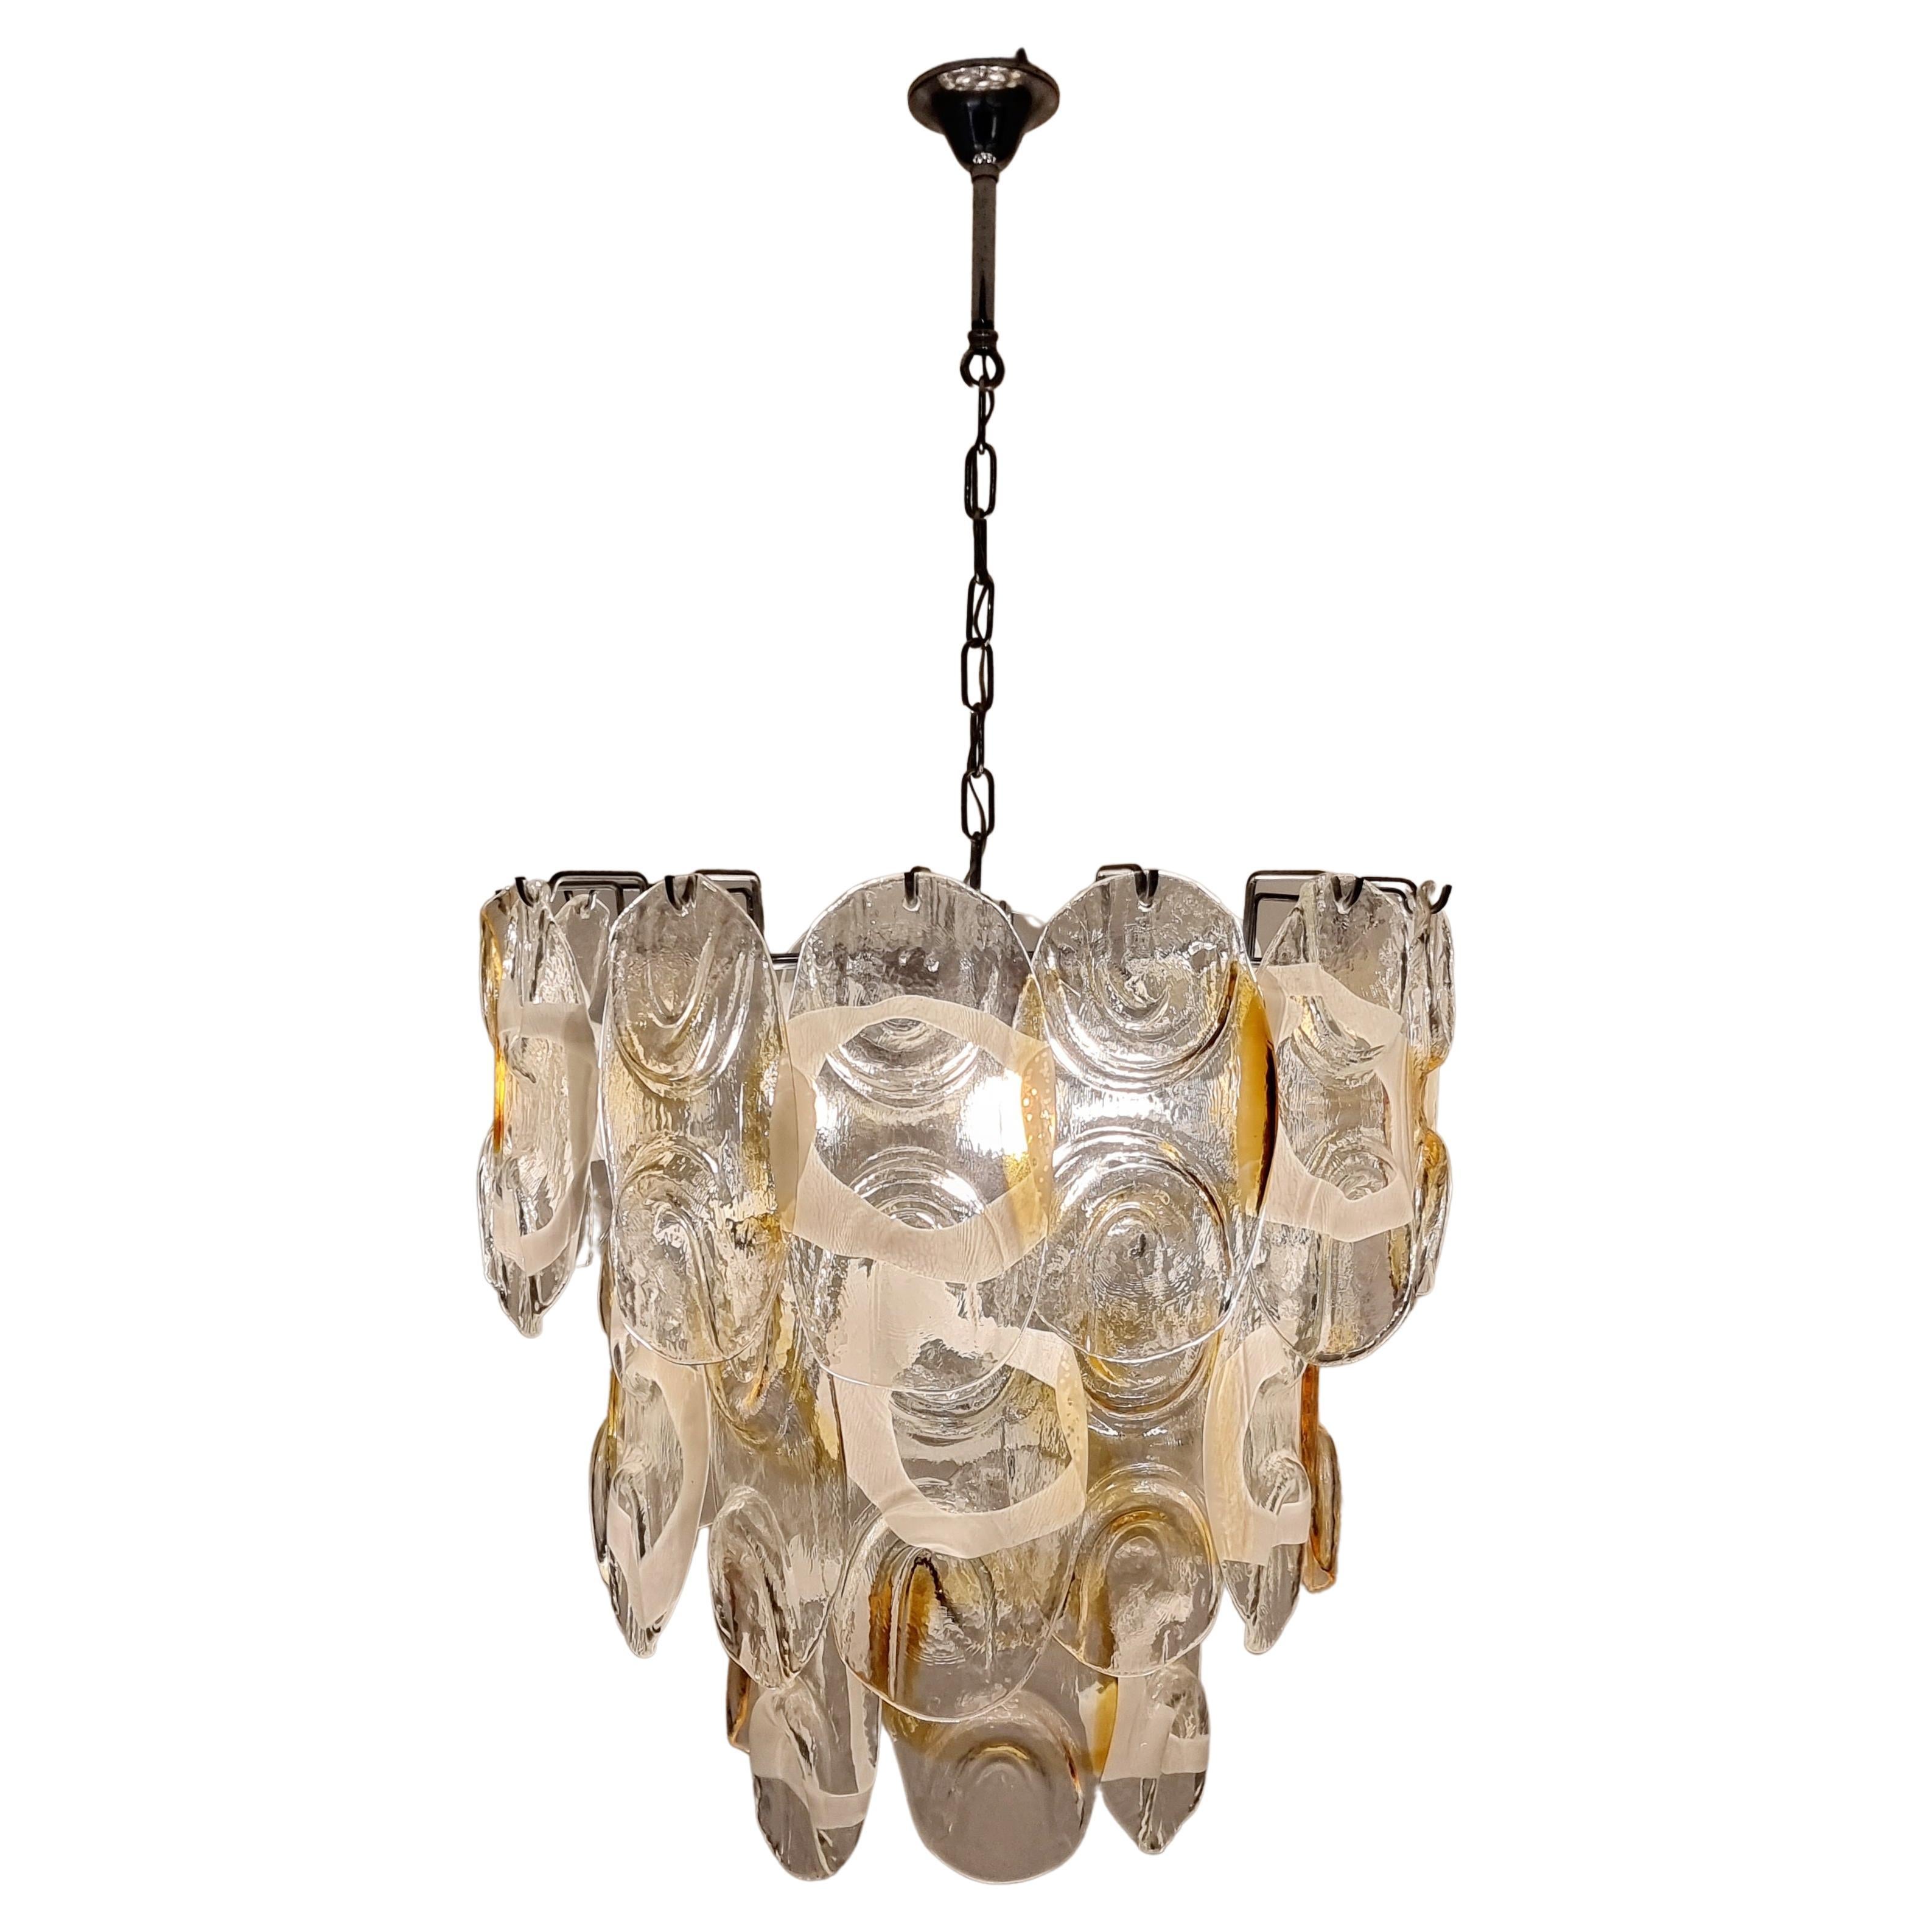 Stunning vintage Murano glass chandelier made in Italy in the 1970s. Consists of 32 glass plates of Murano glass, made by Italian glassblowers. They follow the oldest Murano glassmaking technologies that were invented on the island of Murano. Each